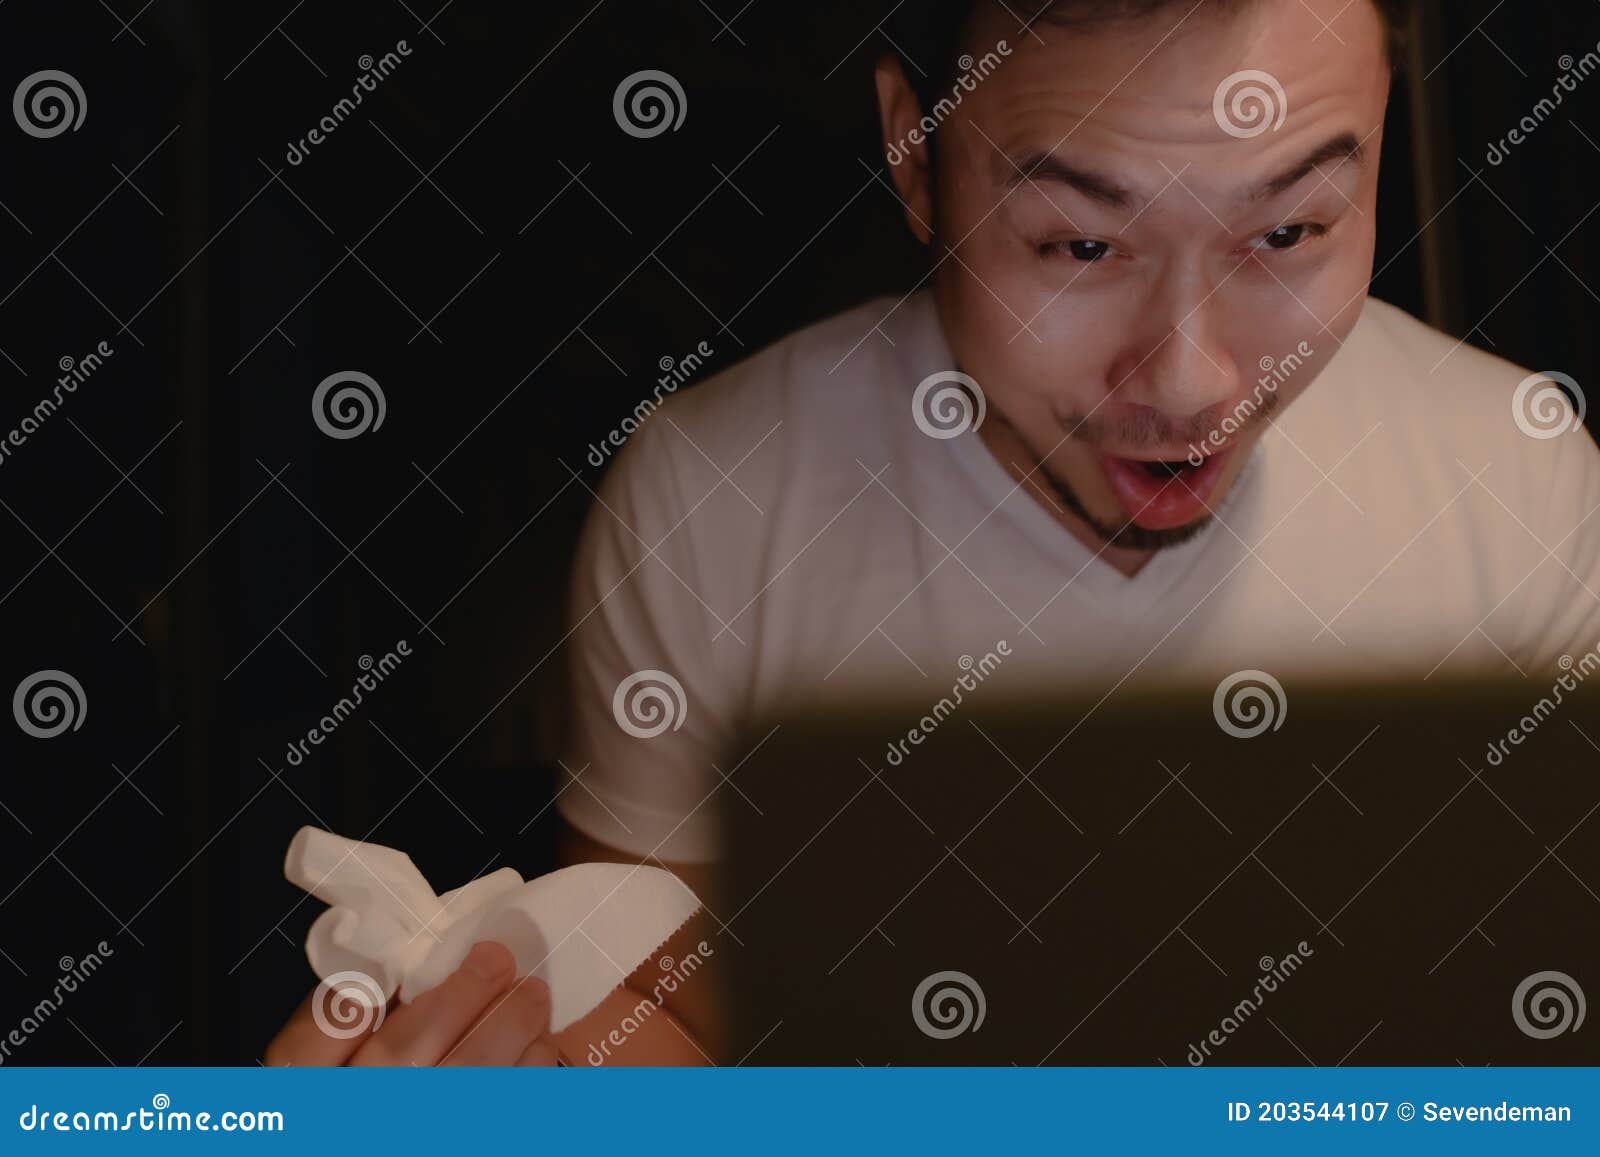 funny horny face of man watching porn at night.